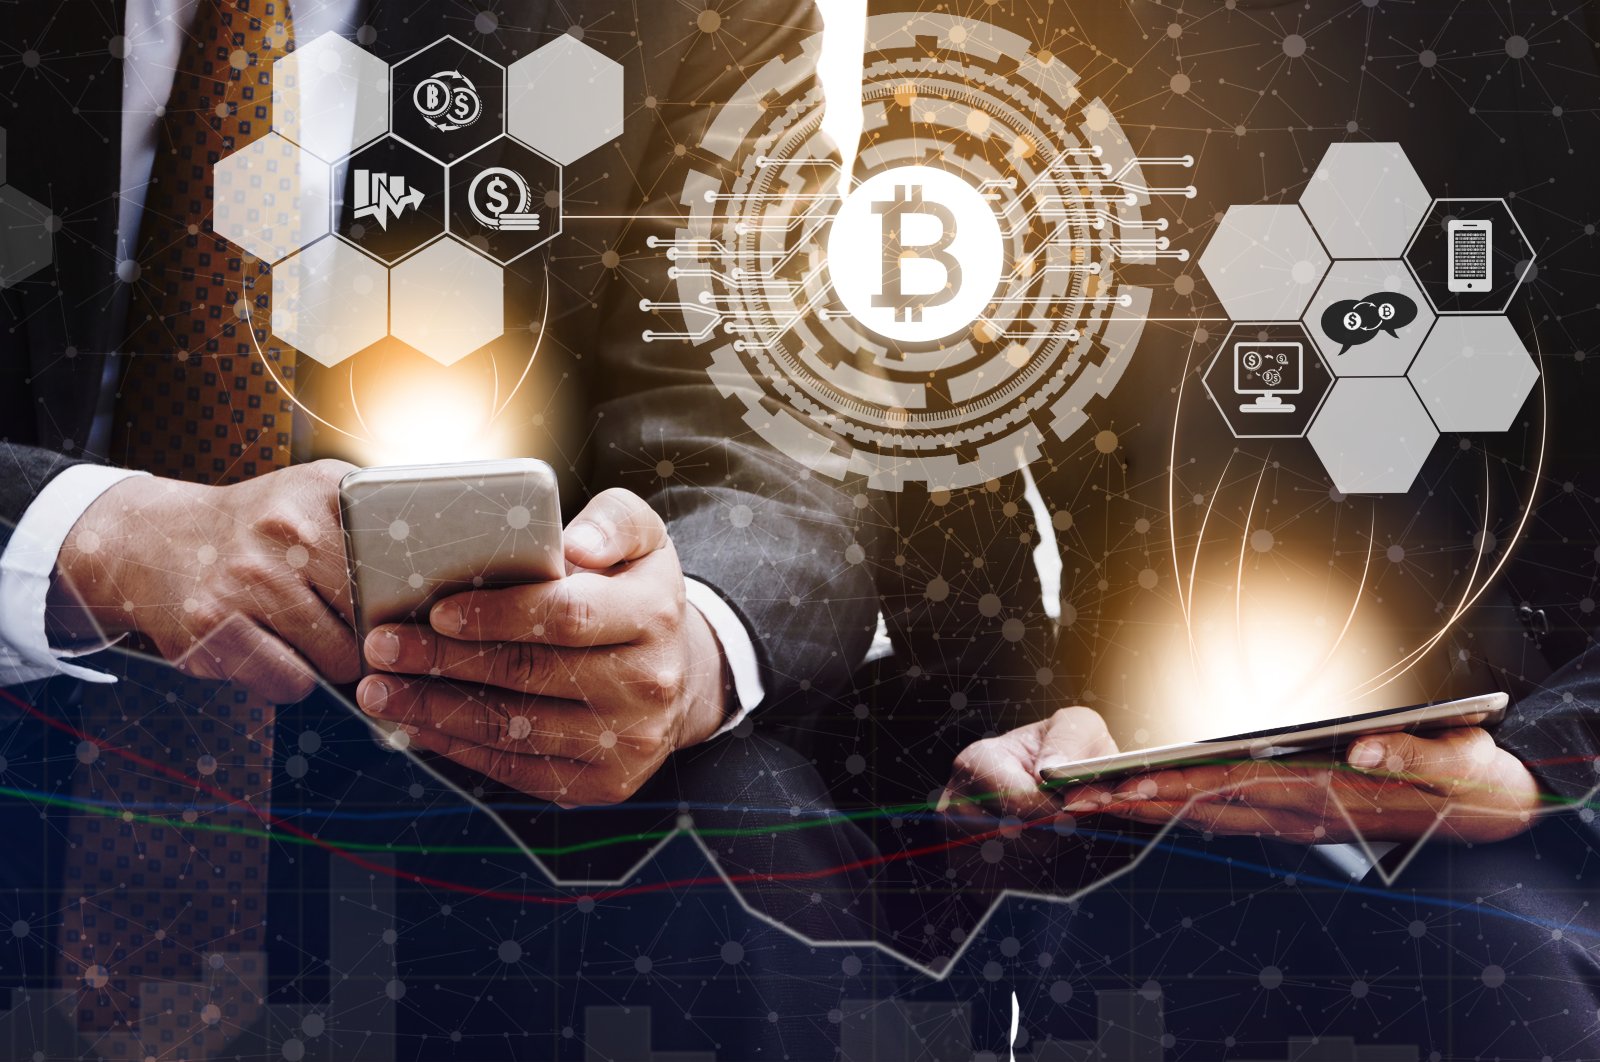 The fintech investments in Türkiye show the exposure to the volatility in the cryptocurrency market remained limited this year. (iStock Photo)